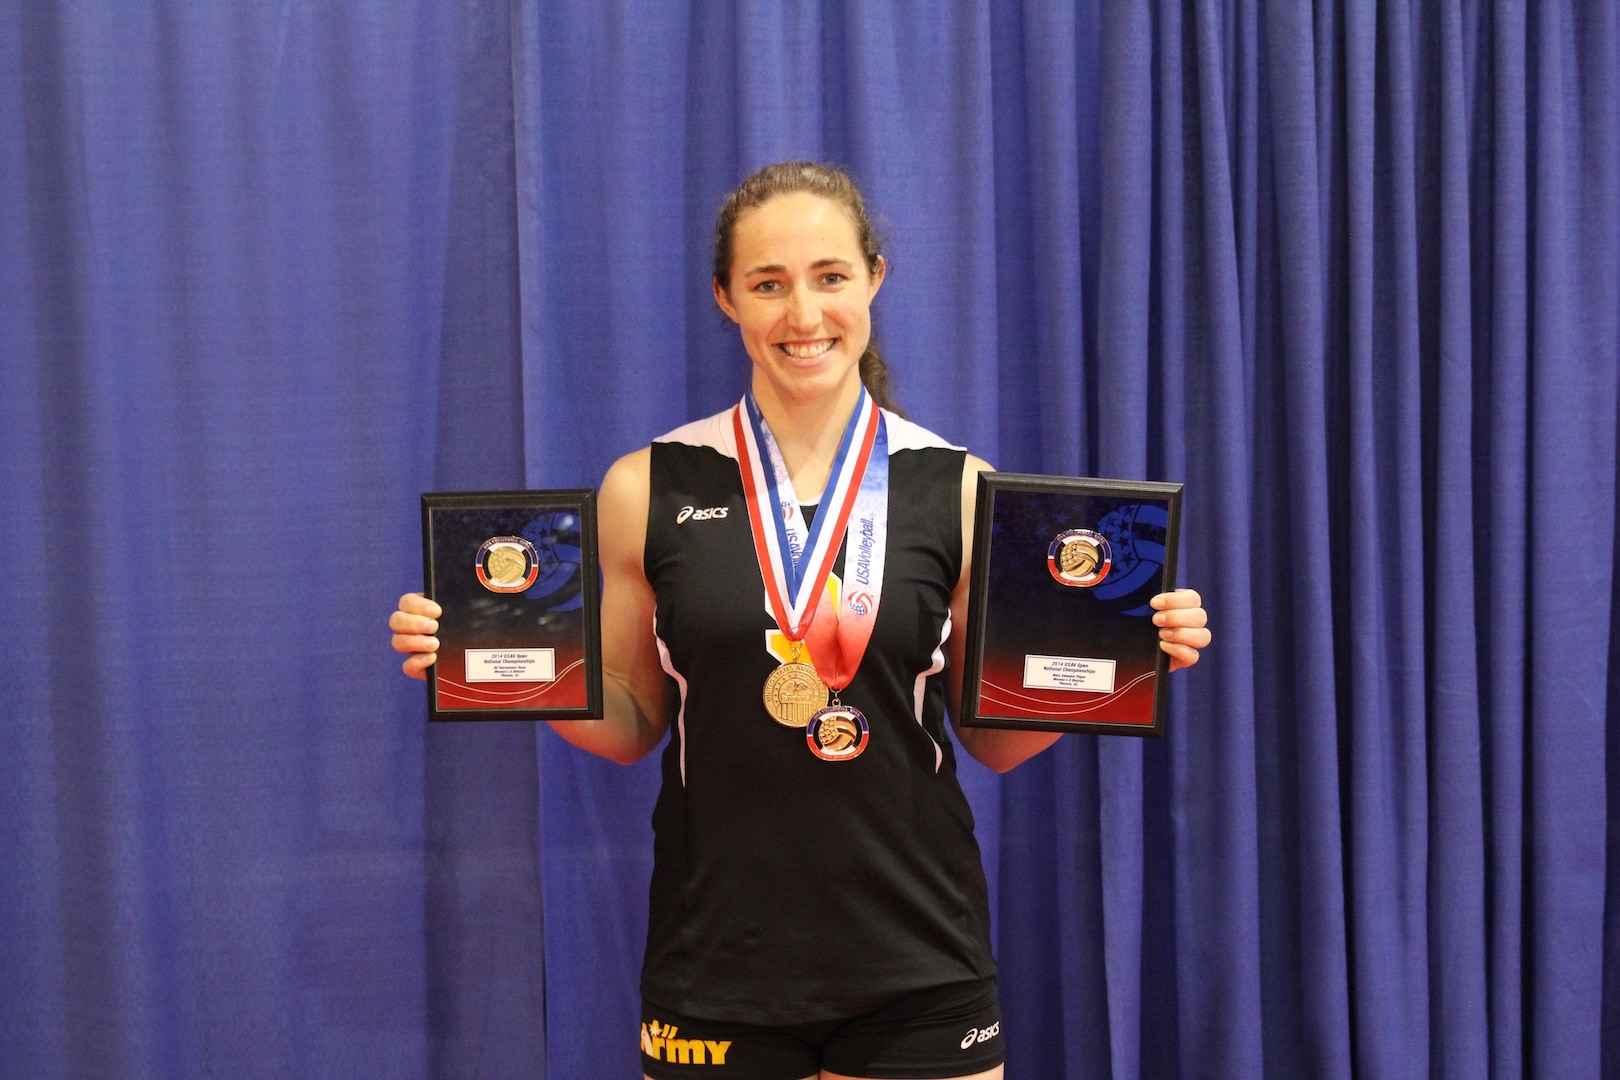 In addition to leading her team to Armed Forces and Nationals Gold, Army's CPT Jamie Pecha (Ft. Bragg, NC) was selected to All-Tournament Team and named the tournament MVP.